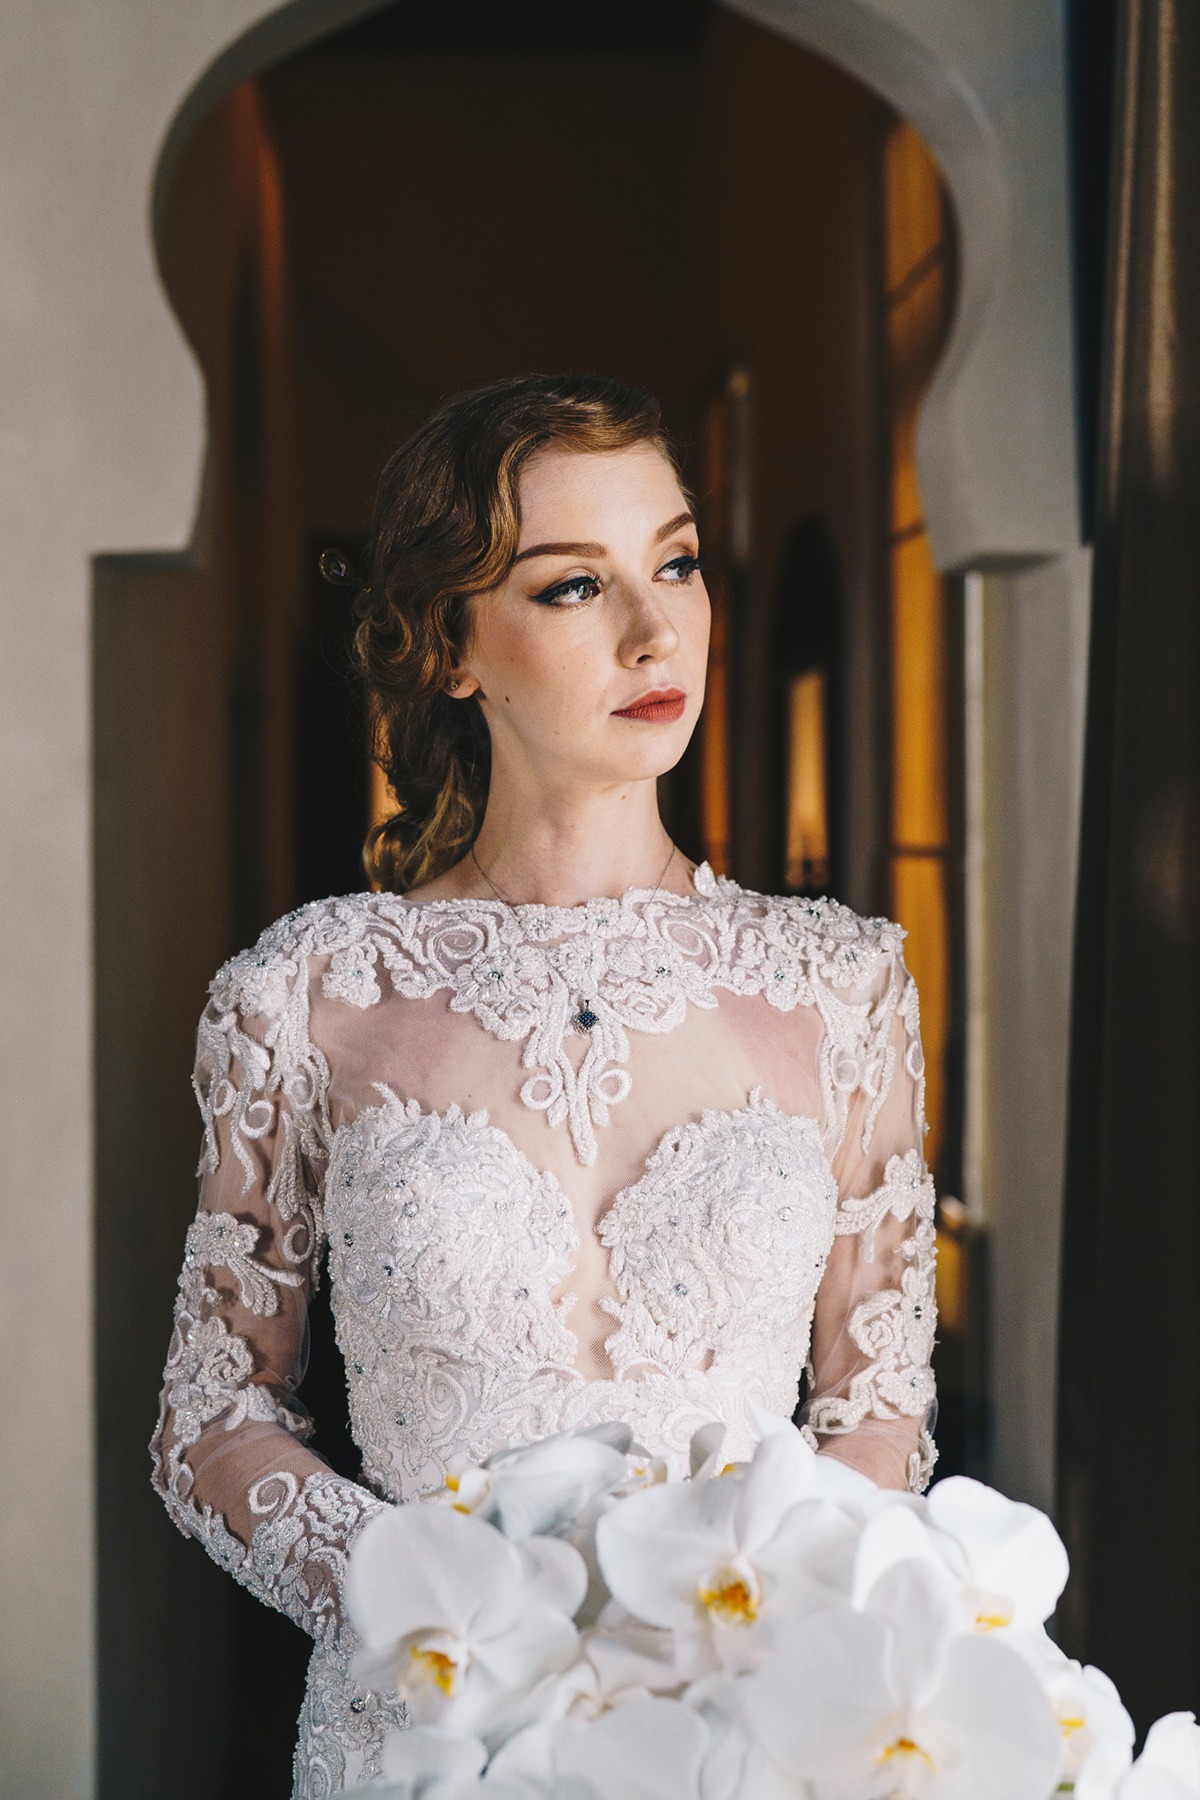 Glam bride in lace